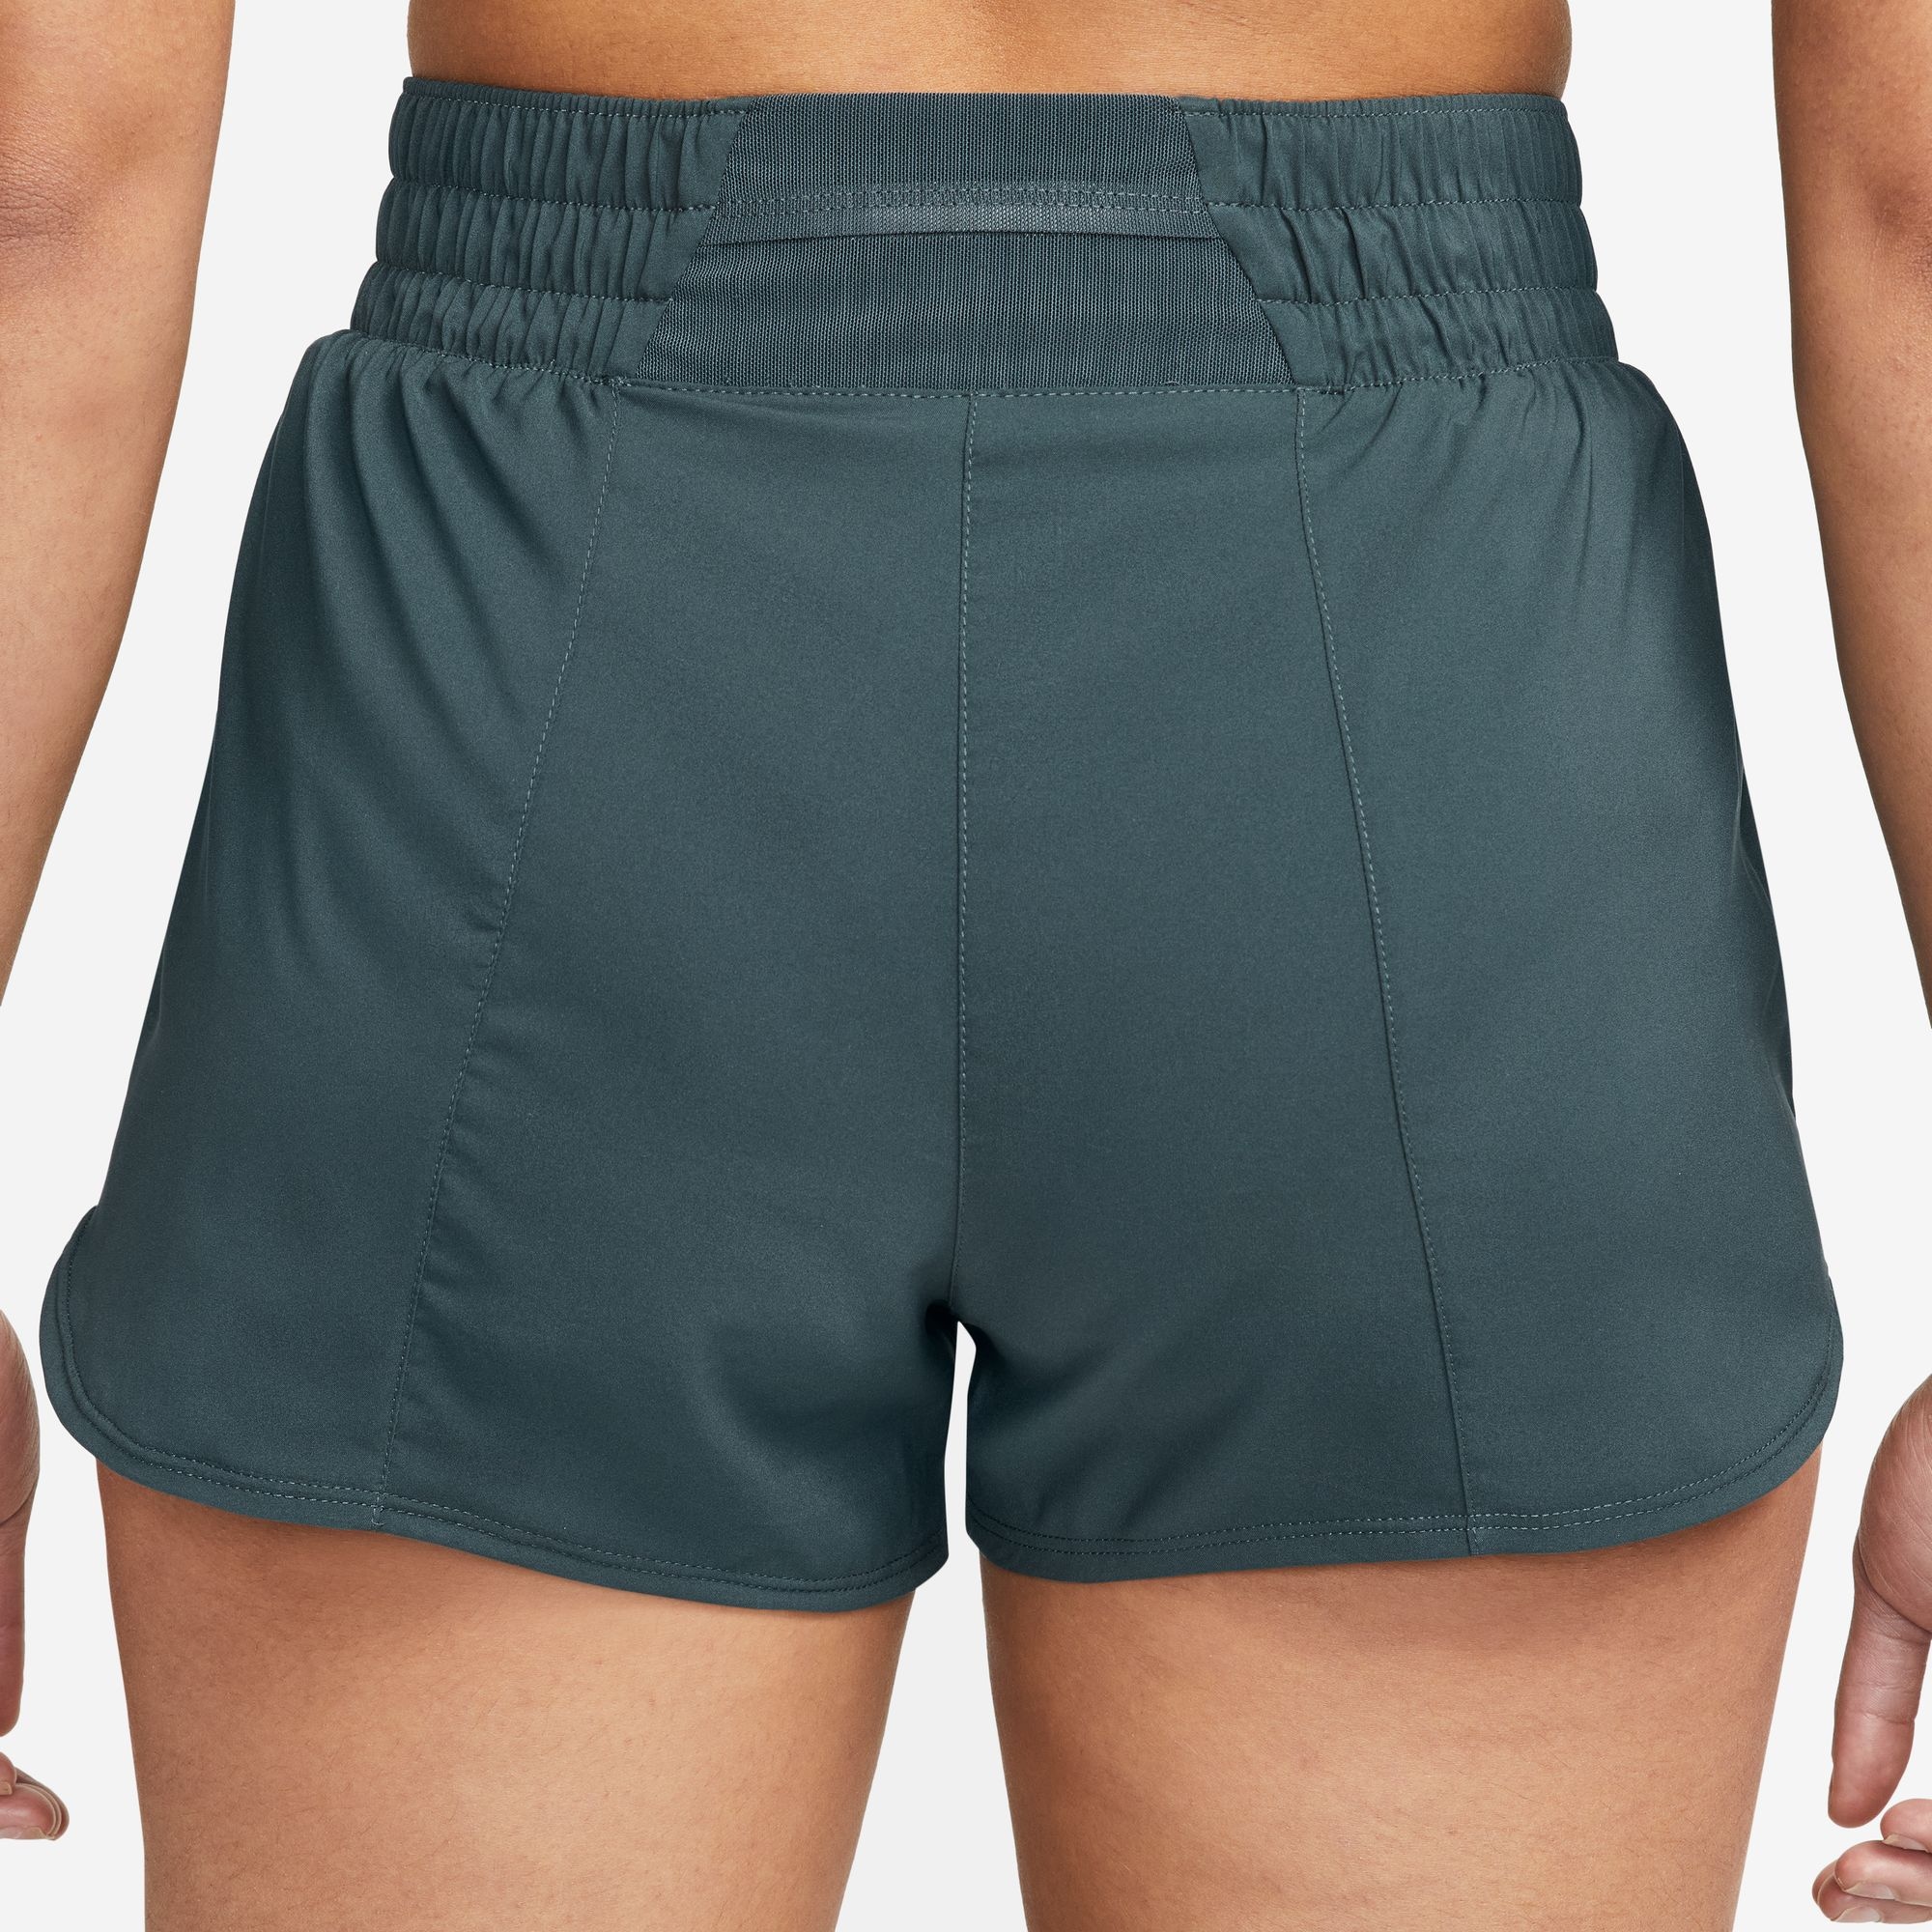 Nike Trainingsshorts »DRI-FIT ONE WOMEN'S MID-RISE BRIEF-LINED SHORTS«